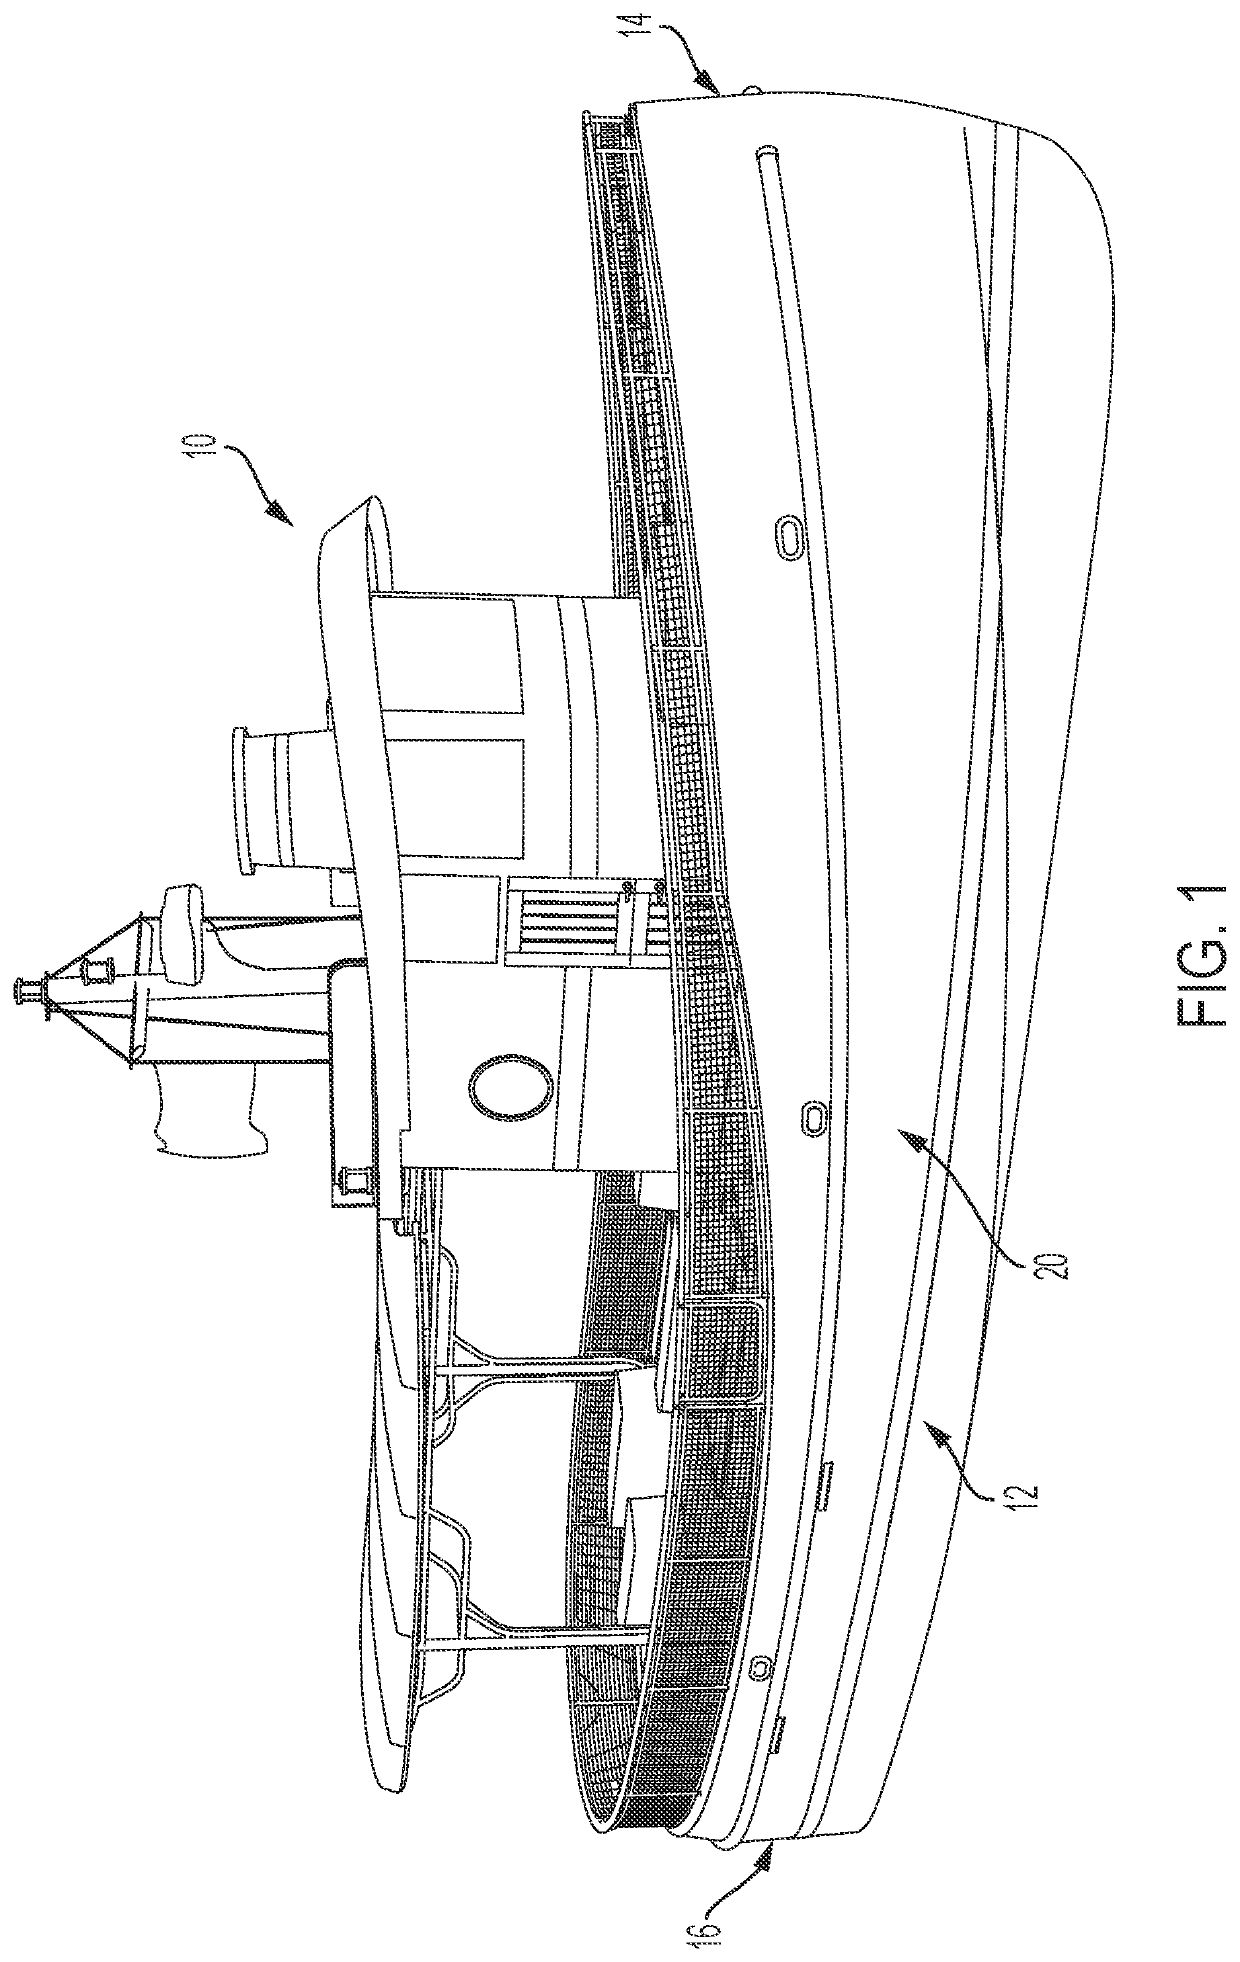 Vessel hull for forming waveforms for attraction of aquatic animals